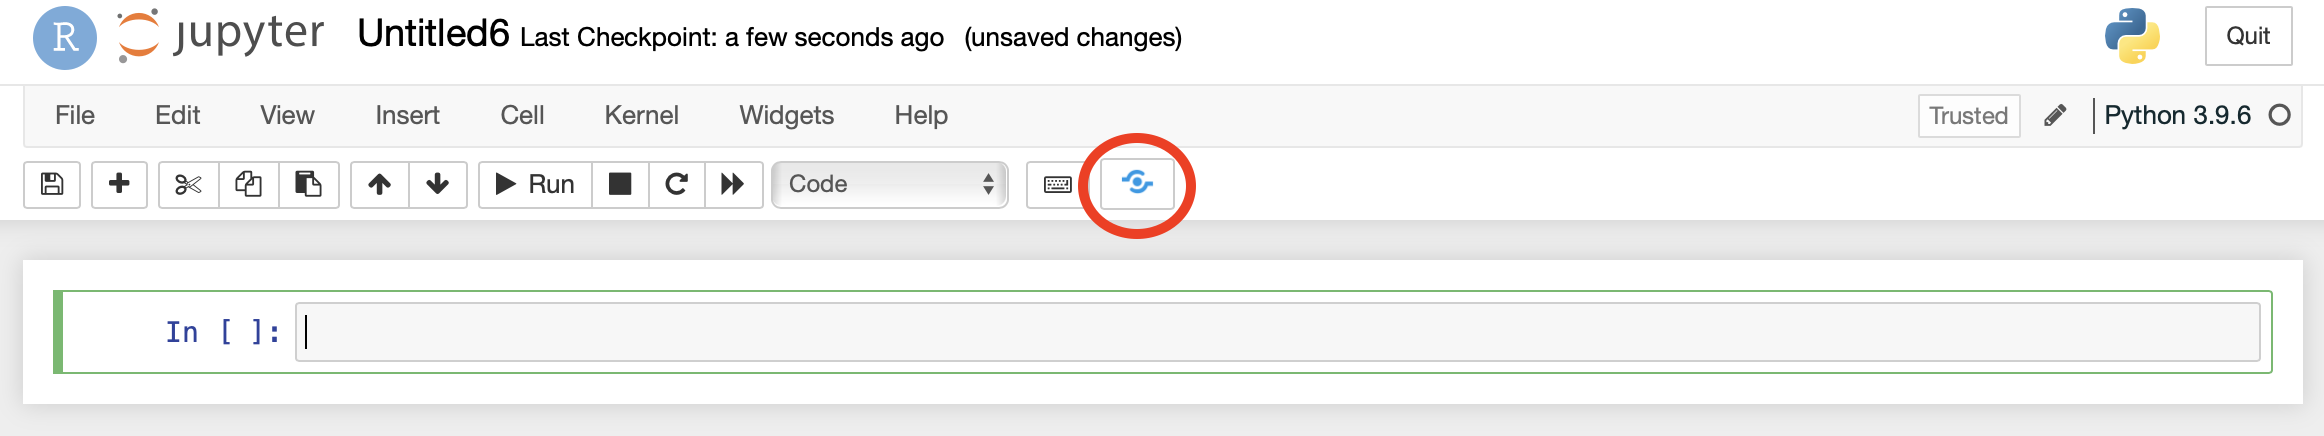 Screenshot showing the Push-button publish button in Jupyter Notebooks.